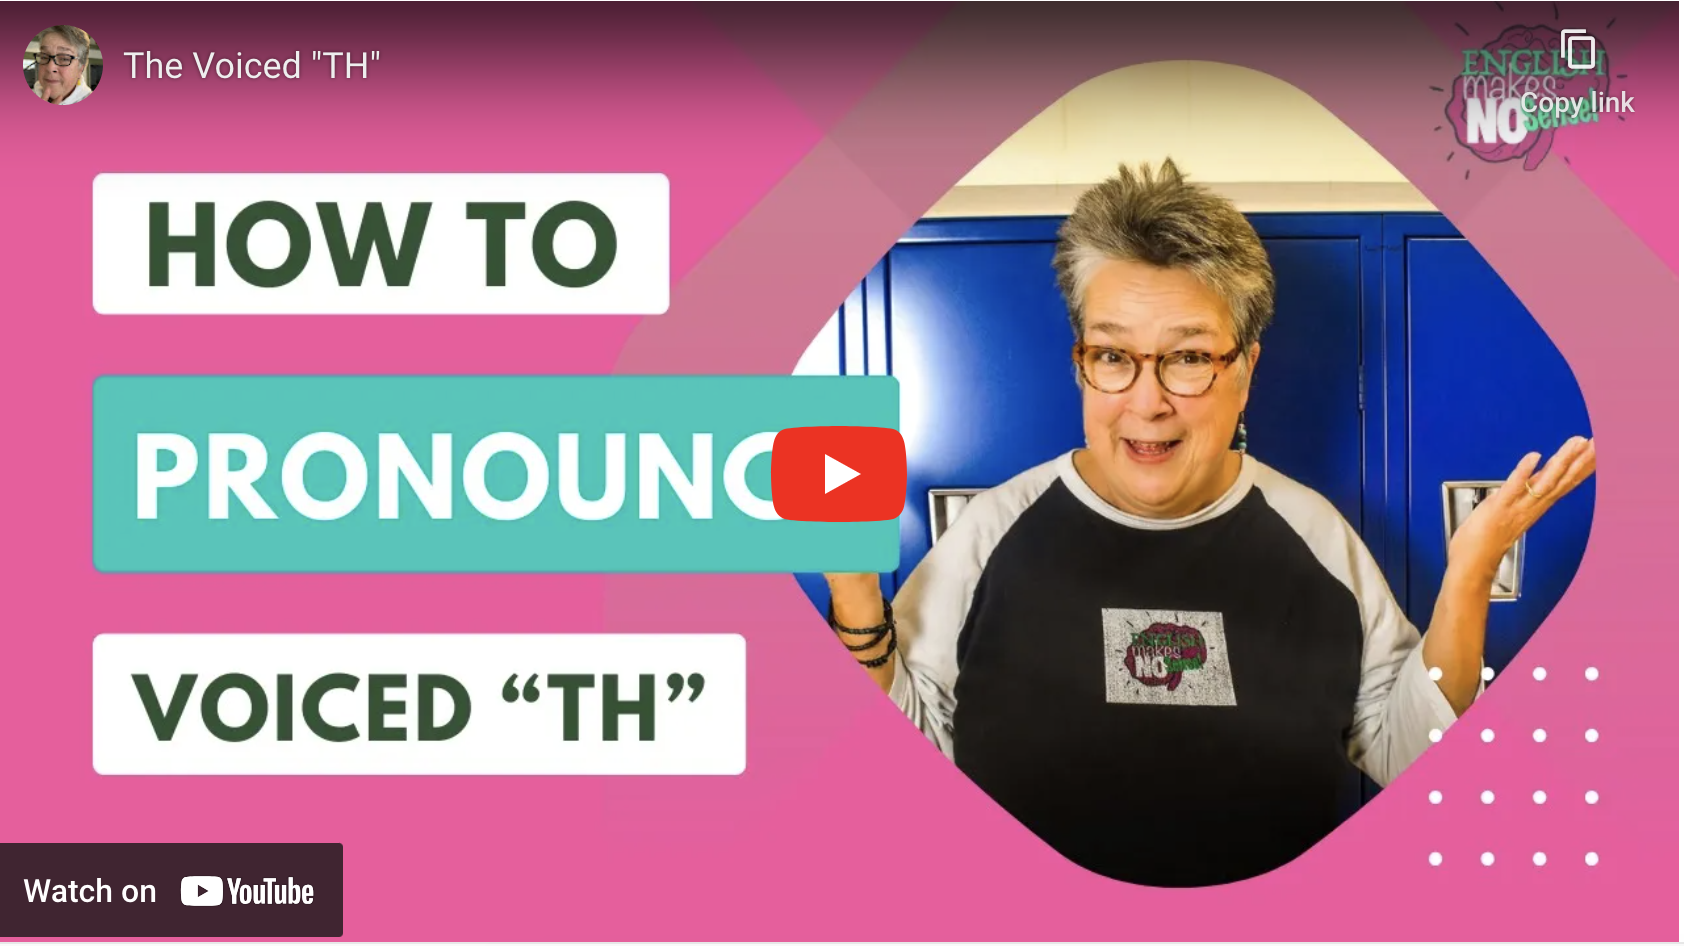 How to pronounce voiced "TH"